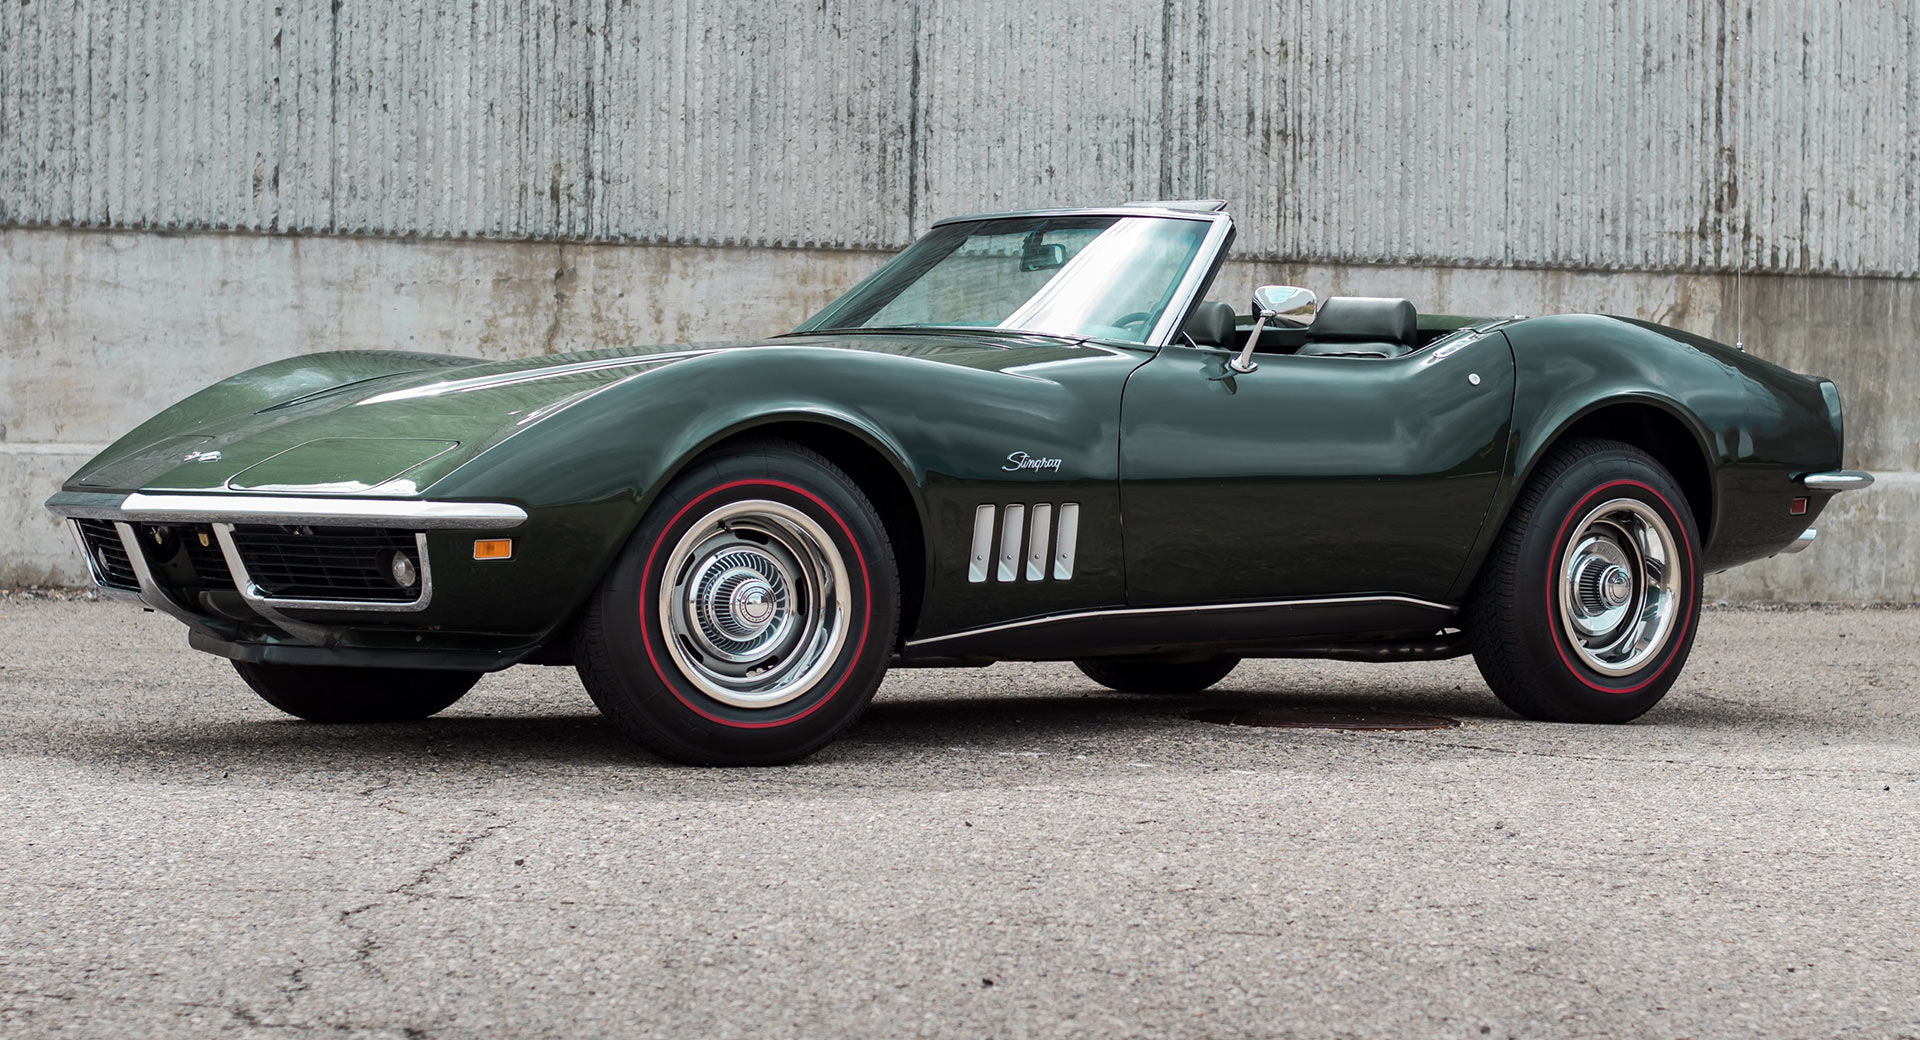 At $40,000, Can This '69 Corvette Stingray Convince You To Spend Your  Green? | Carscoops